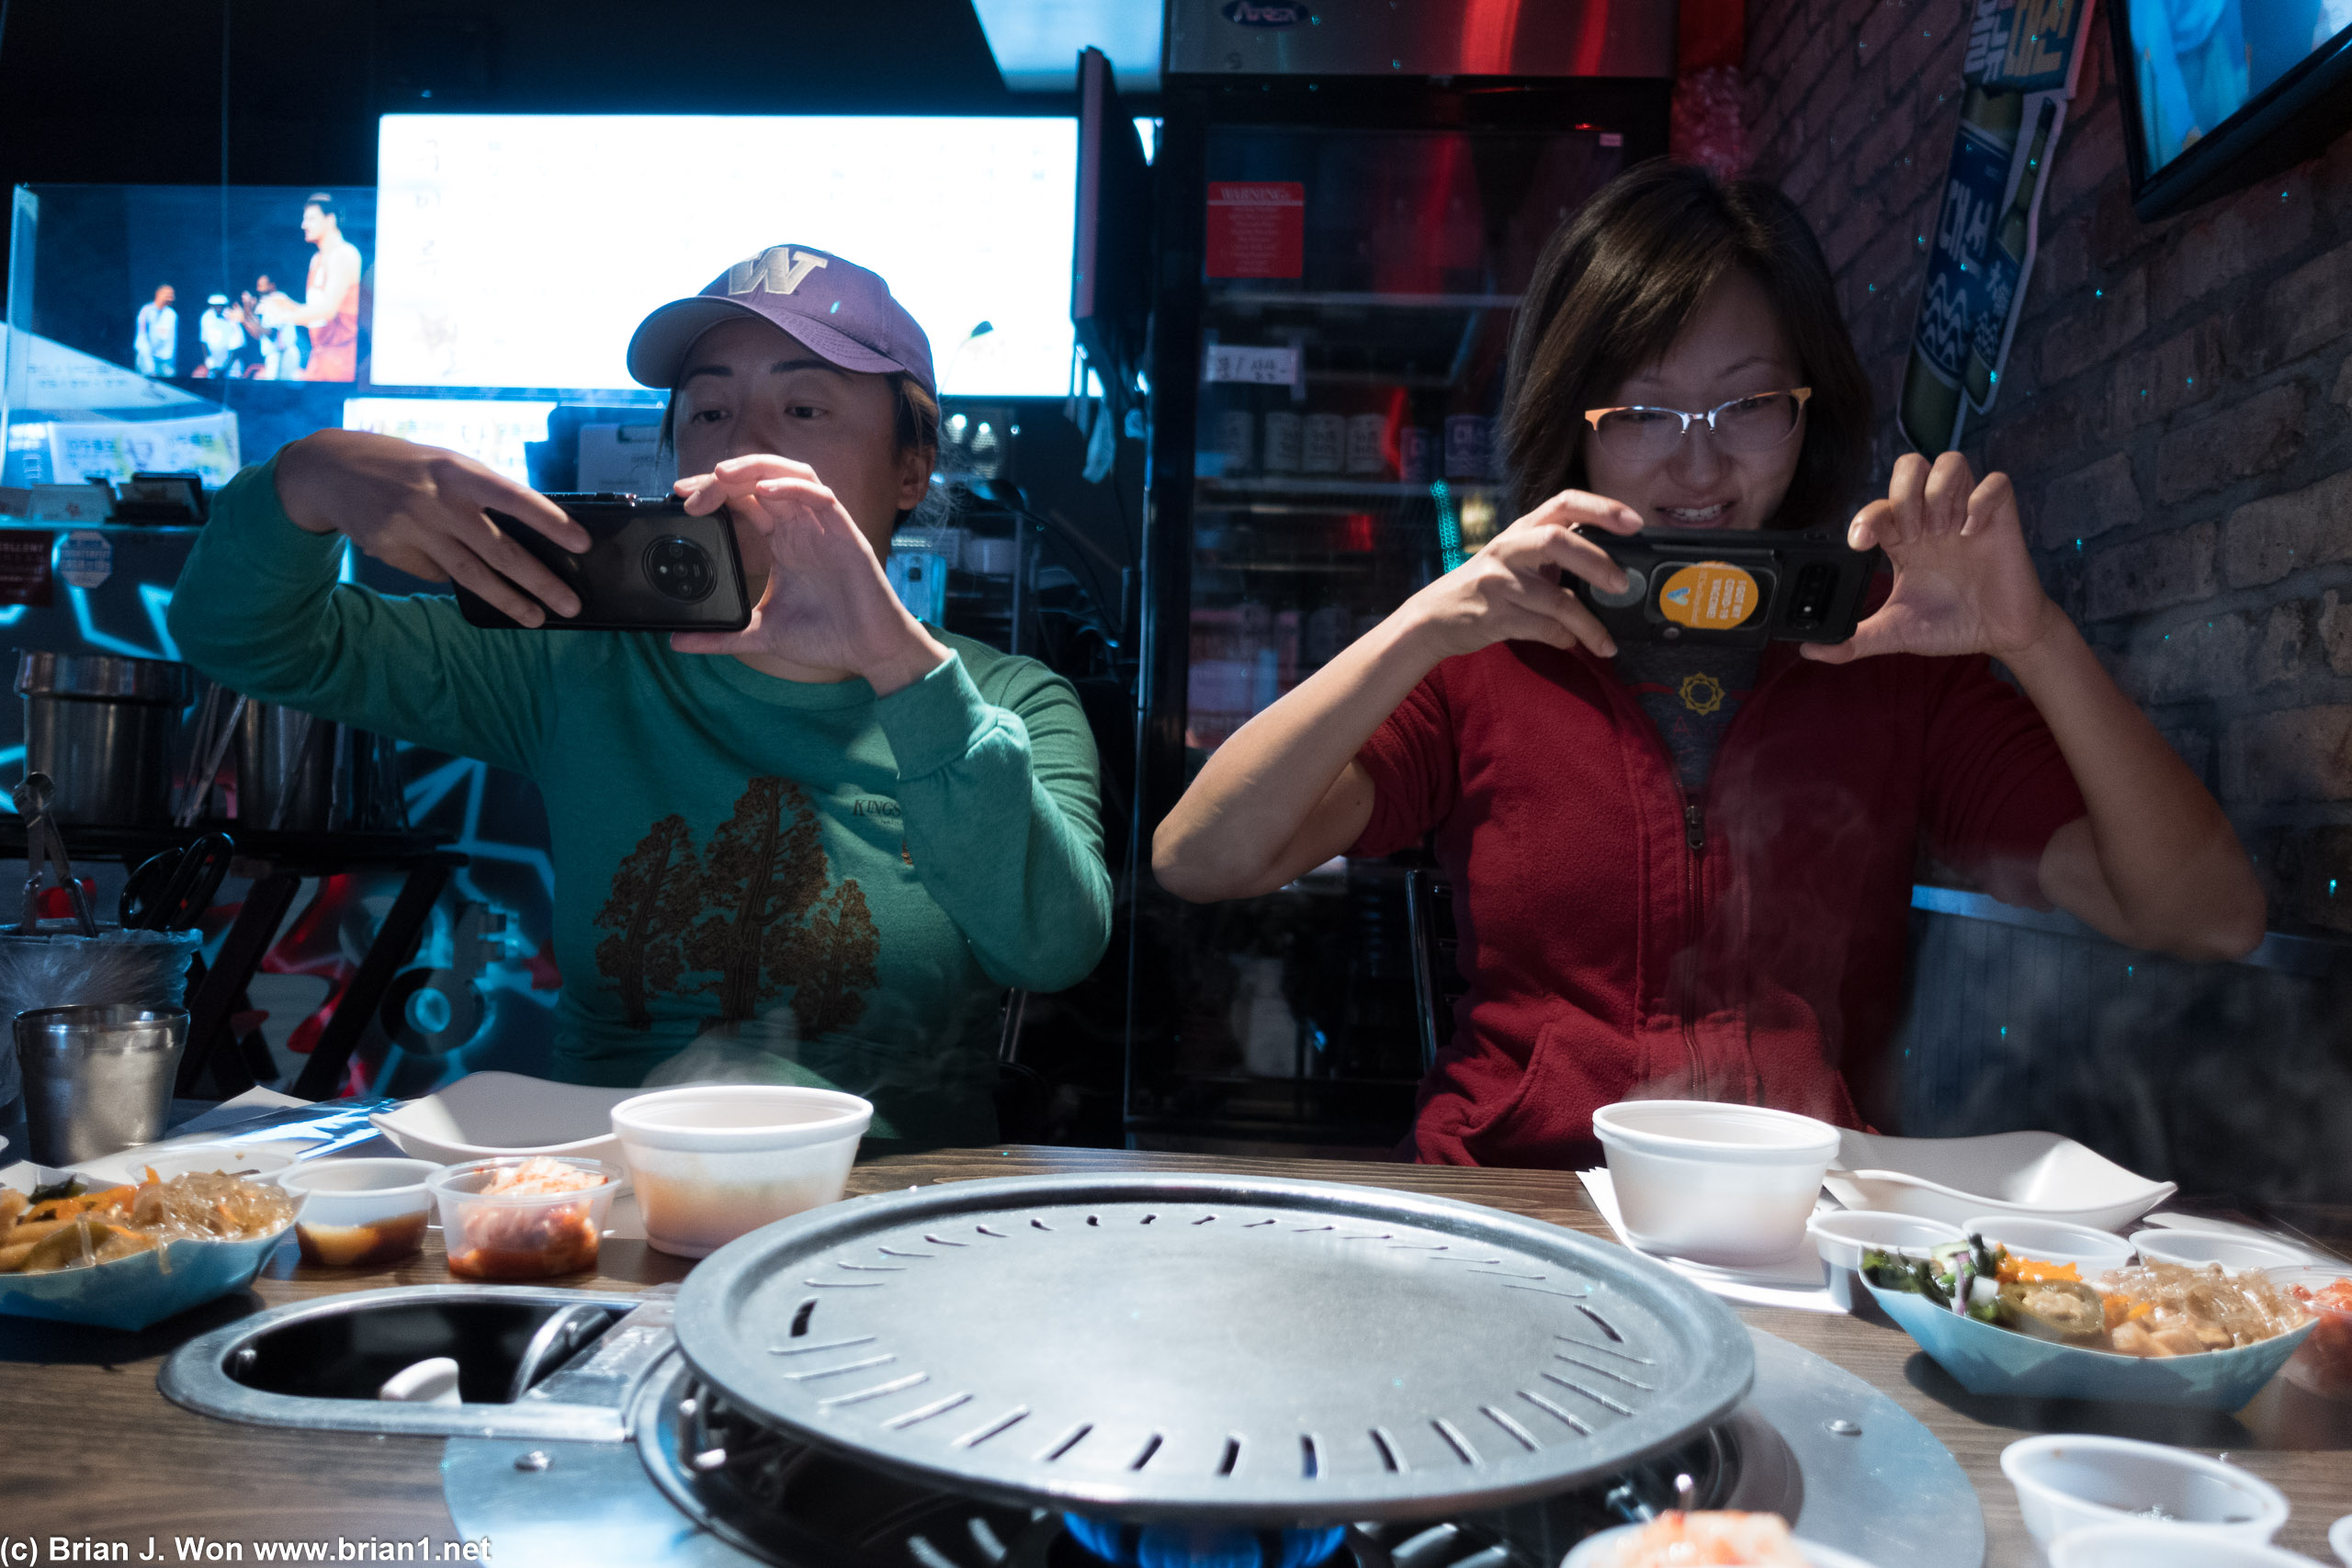 Asians taking pictures of food. Surprising, I know.